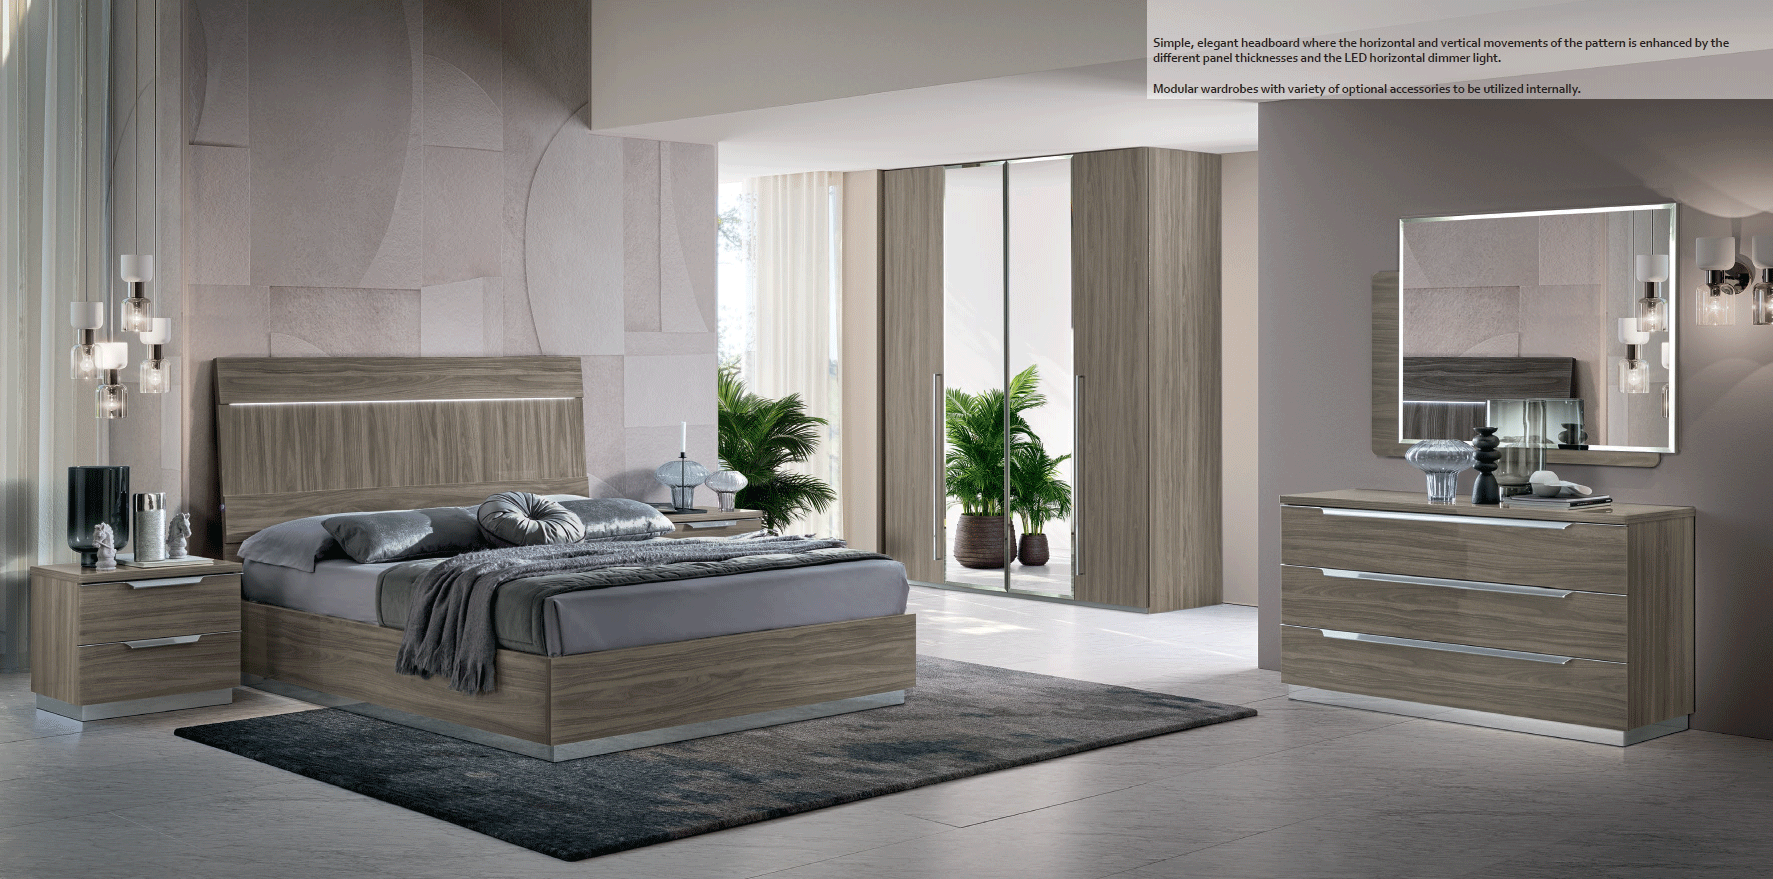 Clearance Bedroom Kroma Bedroom GREY Additional Items